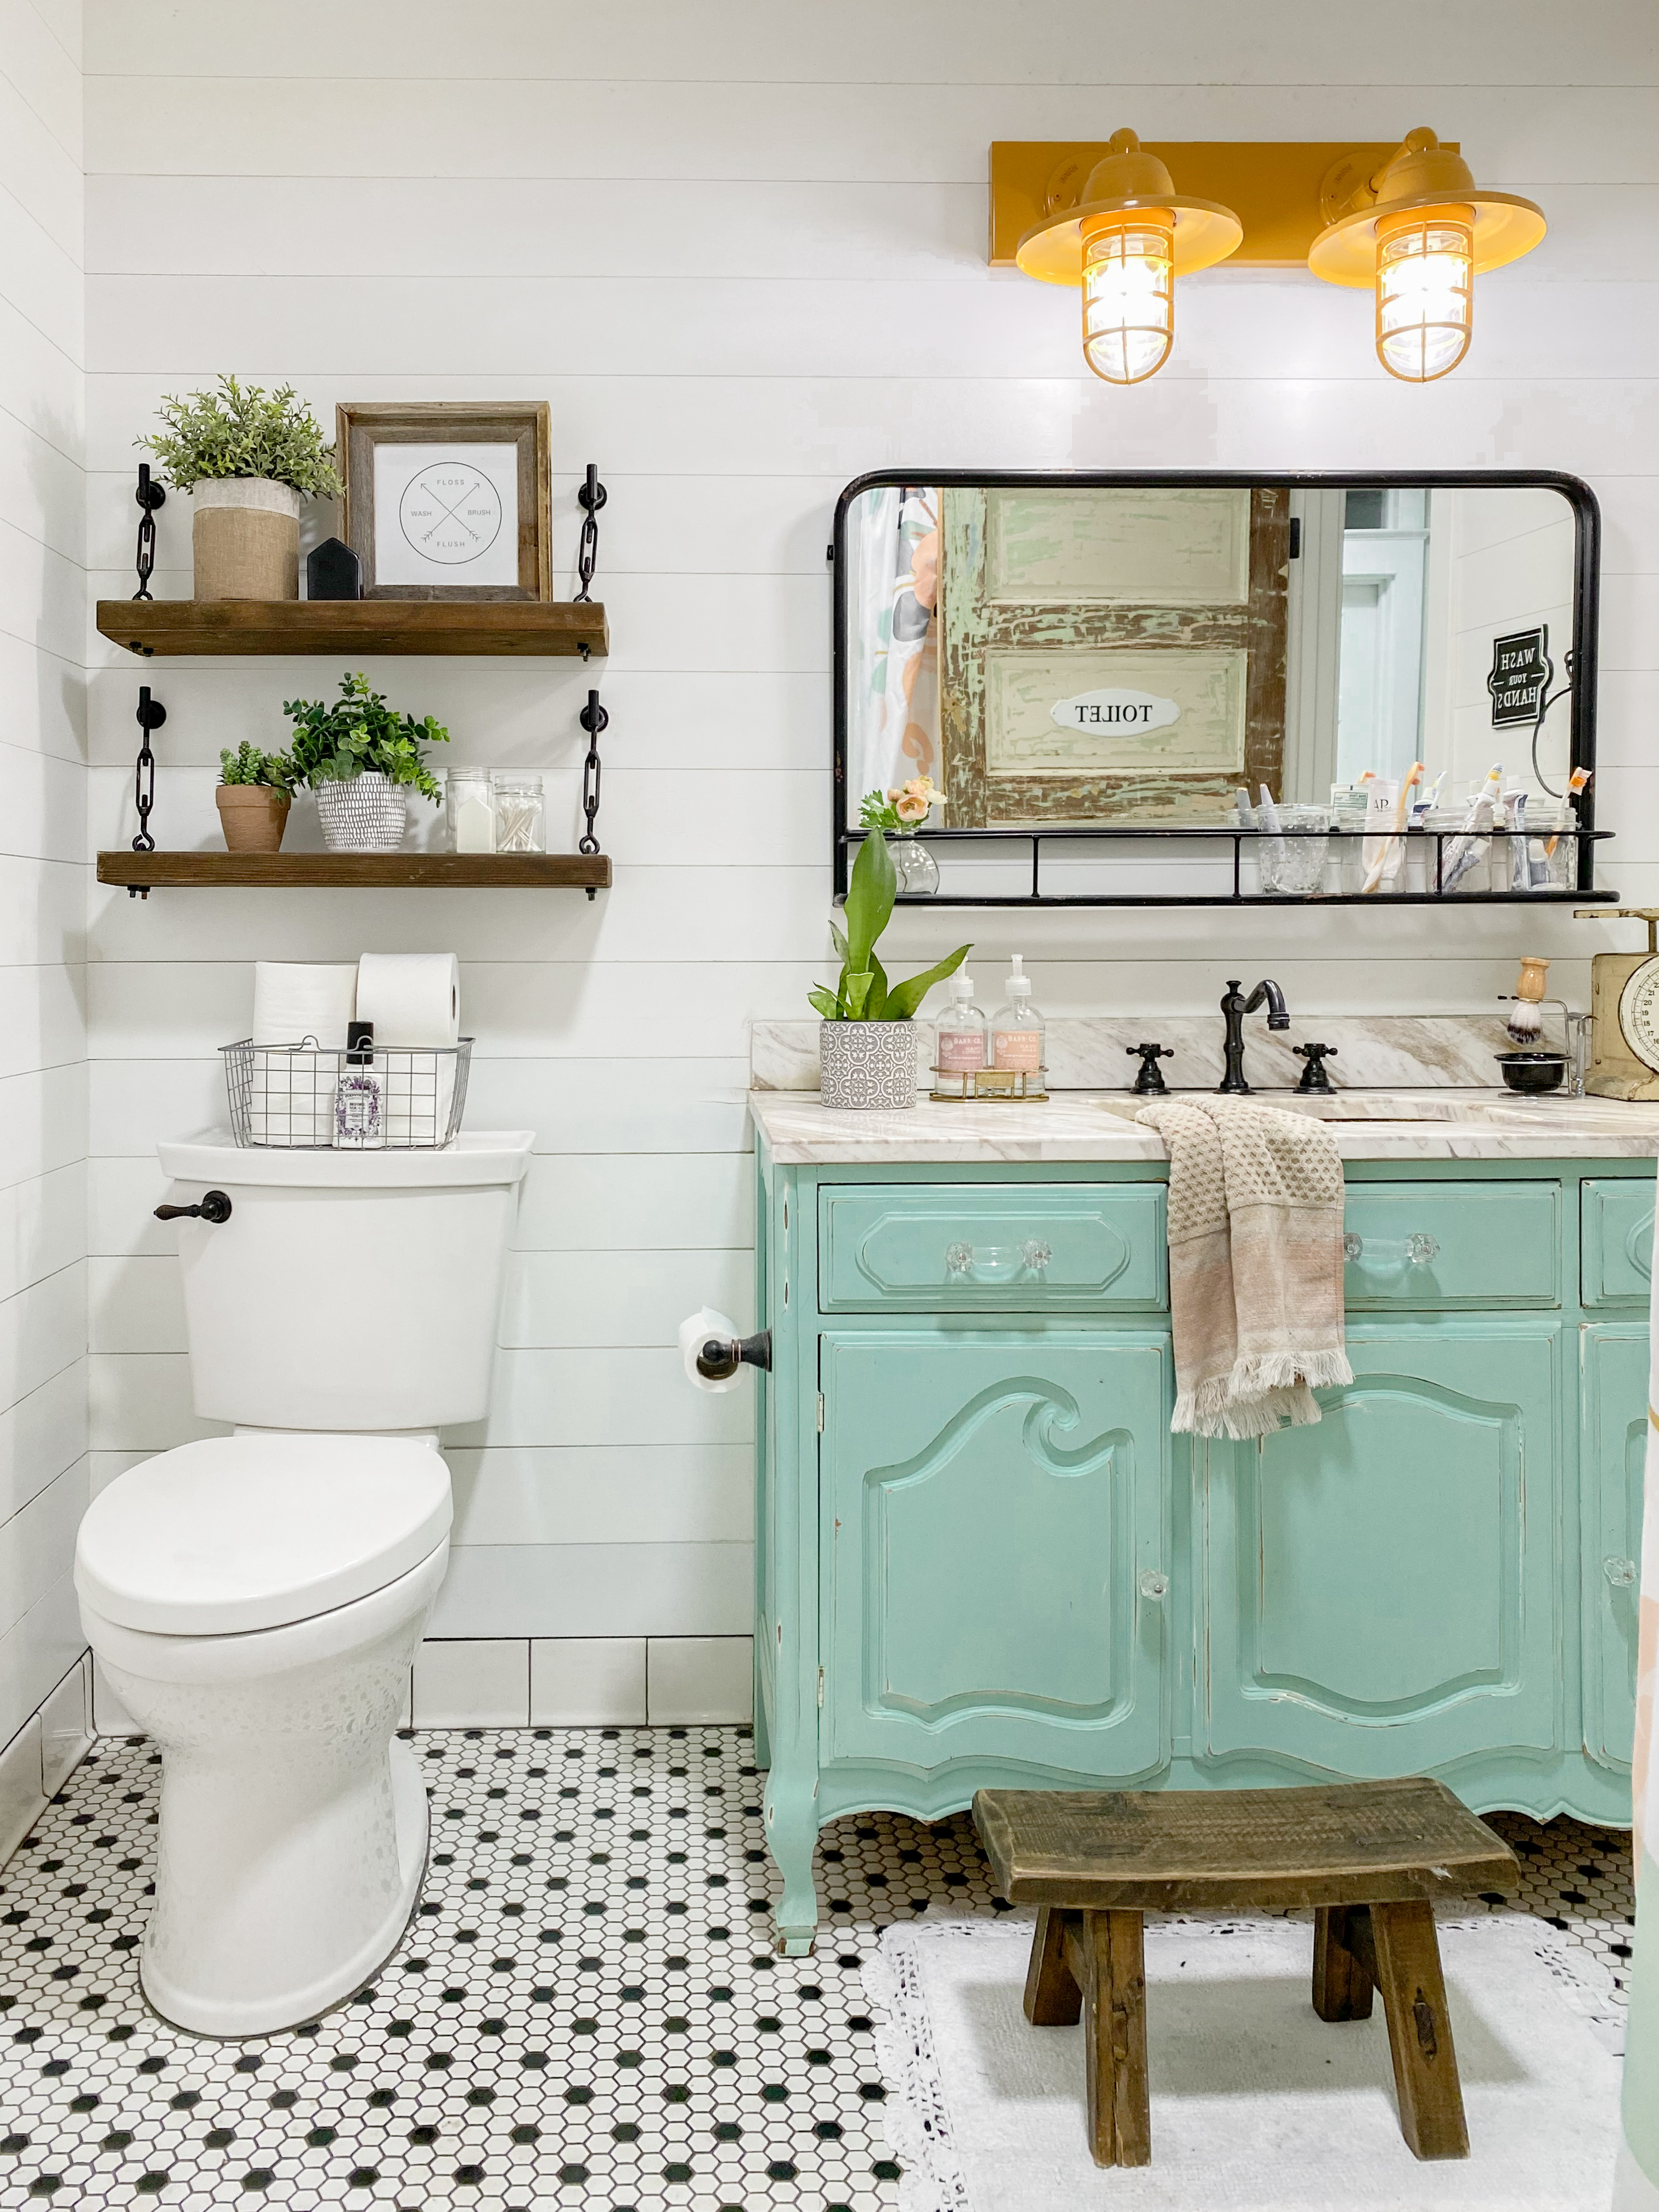 AMAZING Farmhouse Style Bathroom, so pretty and TONS of DIY's in this space! #diy #farmhousebathroom #bathroom #farmhousestyle #vintage #dressertovanity